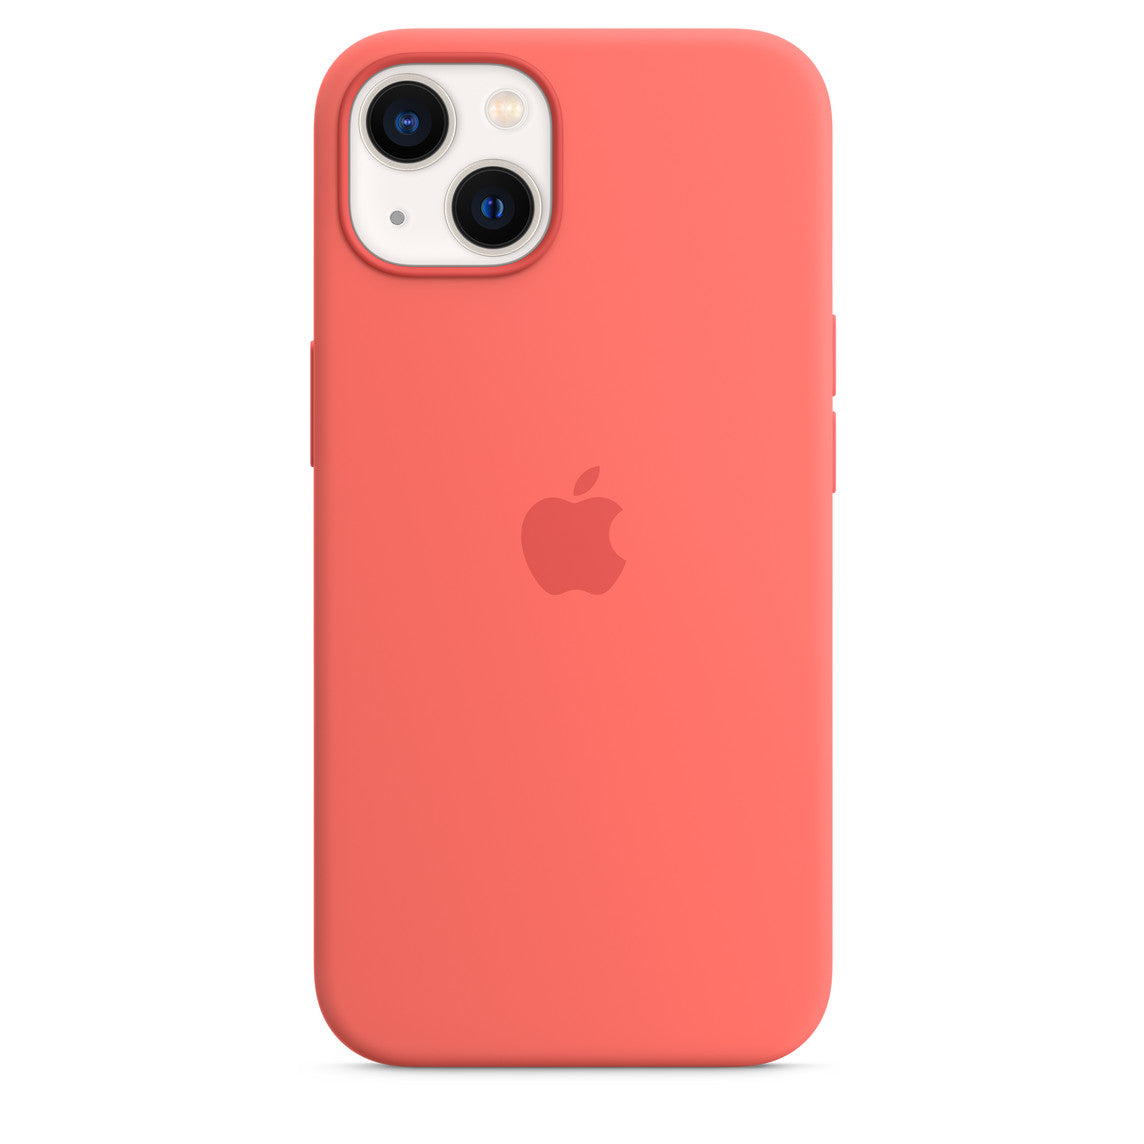 iPhone 13 / 14 Silicone Case with Wireless Charging Support